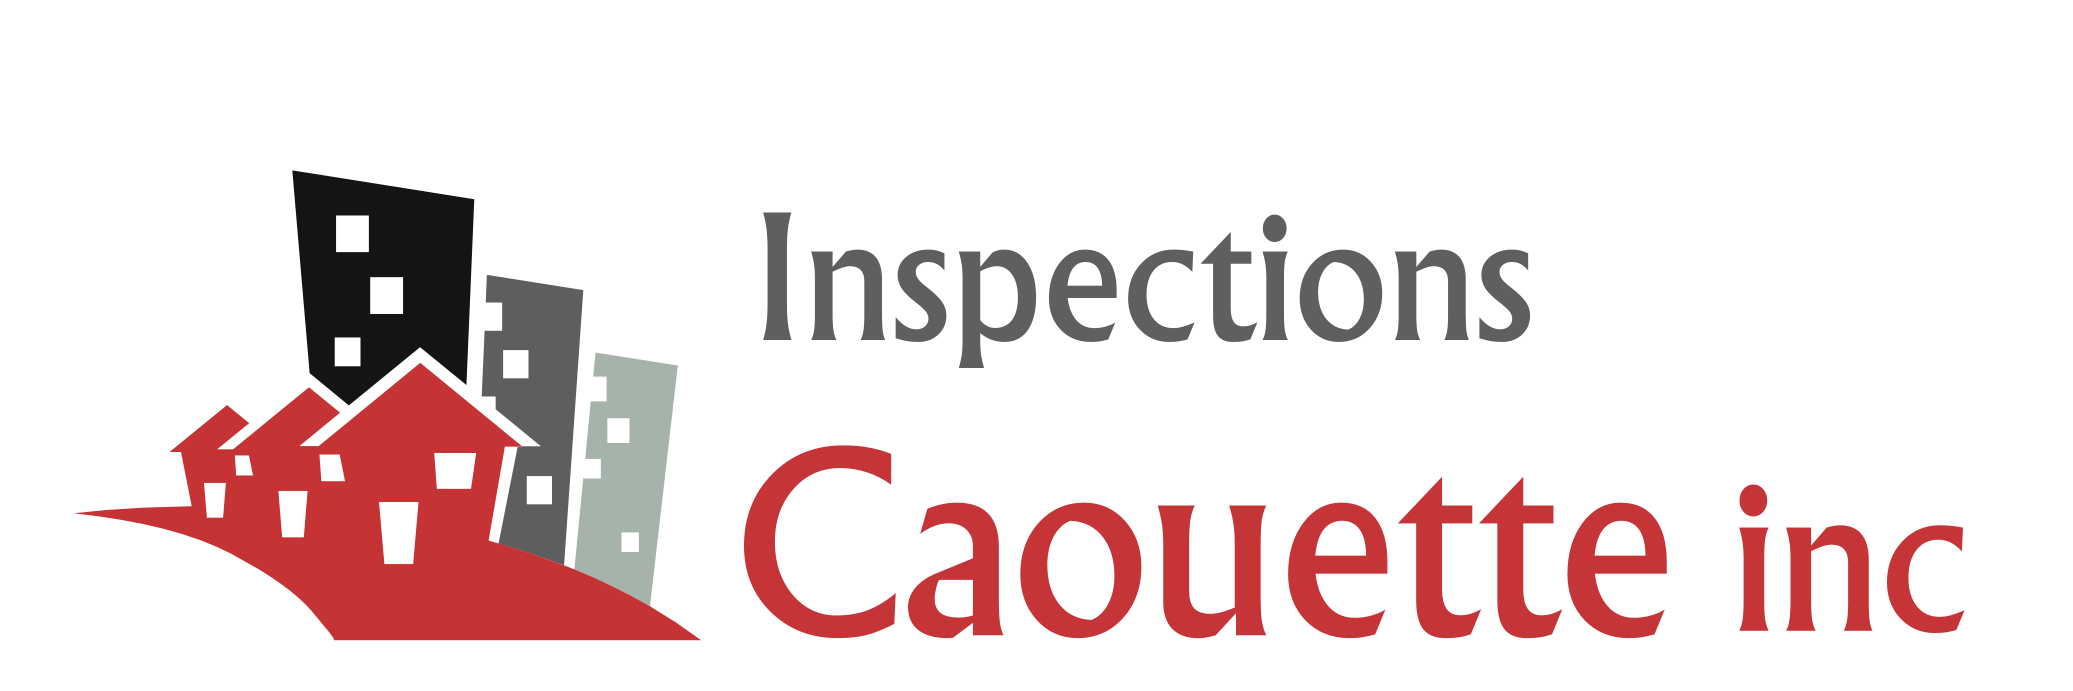 INSPECTIONS CAOUETTE INC.